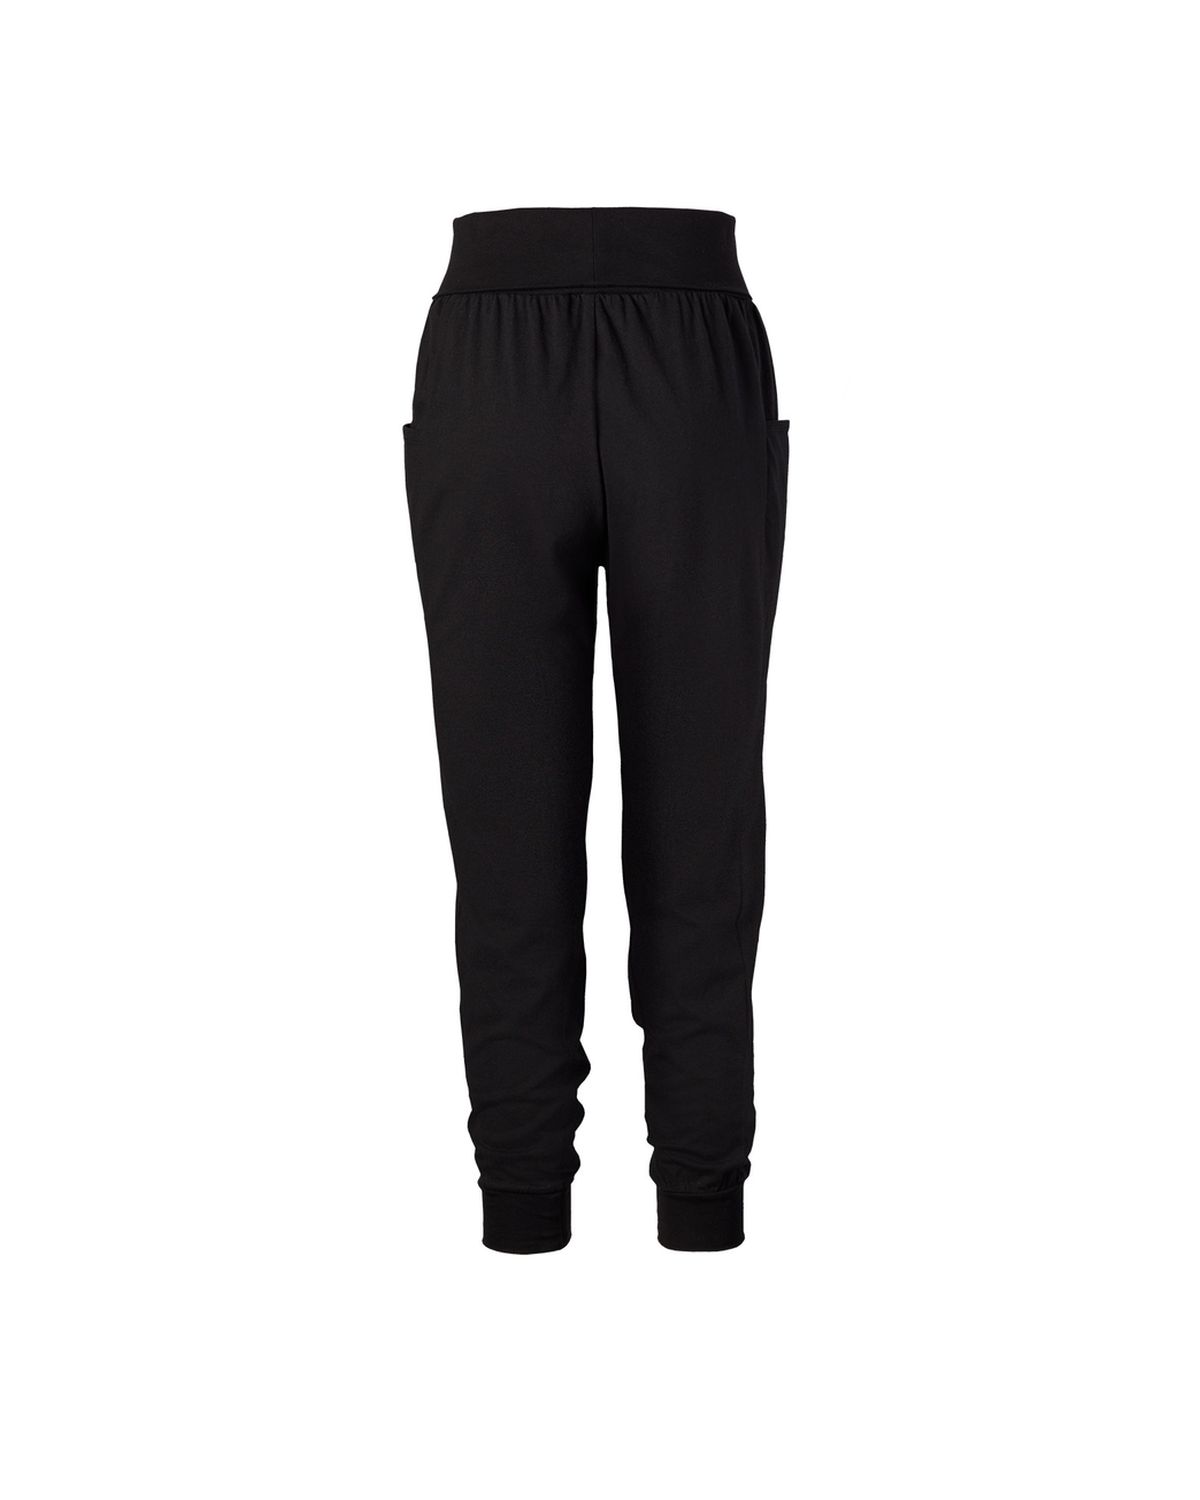 'Soffe 5710V Womens Victory Crop Pant'